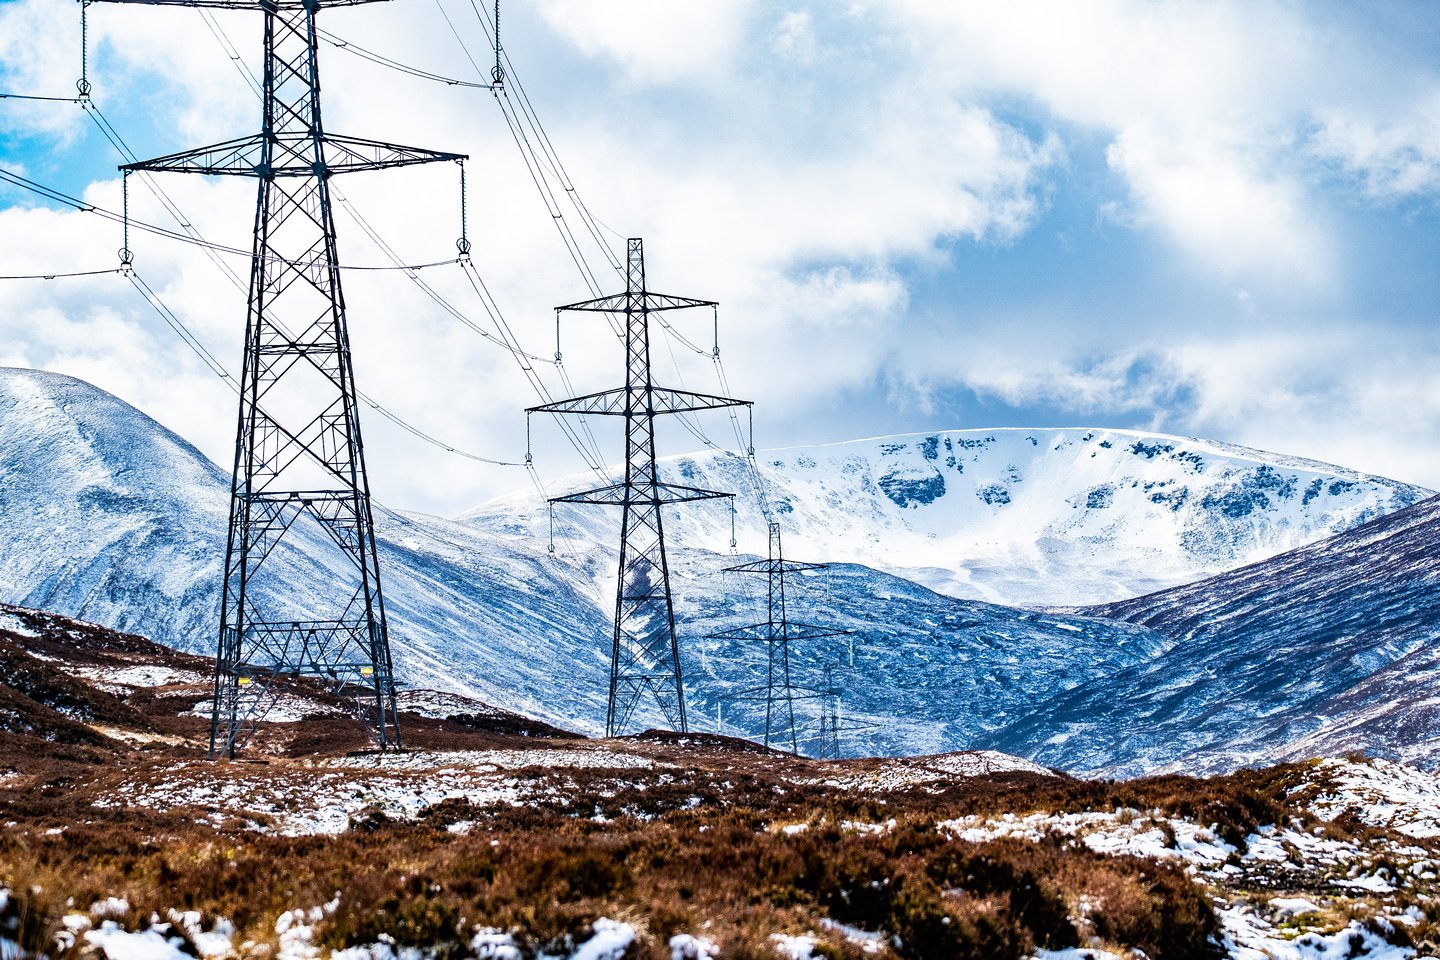 A series of transmission towers stand proudly across the Scottish Highlands against a snowy backdrop